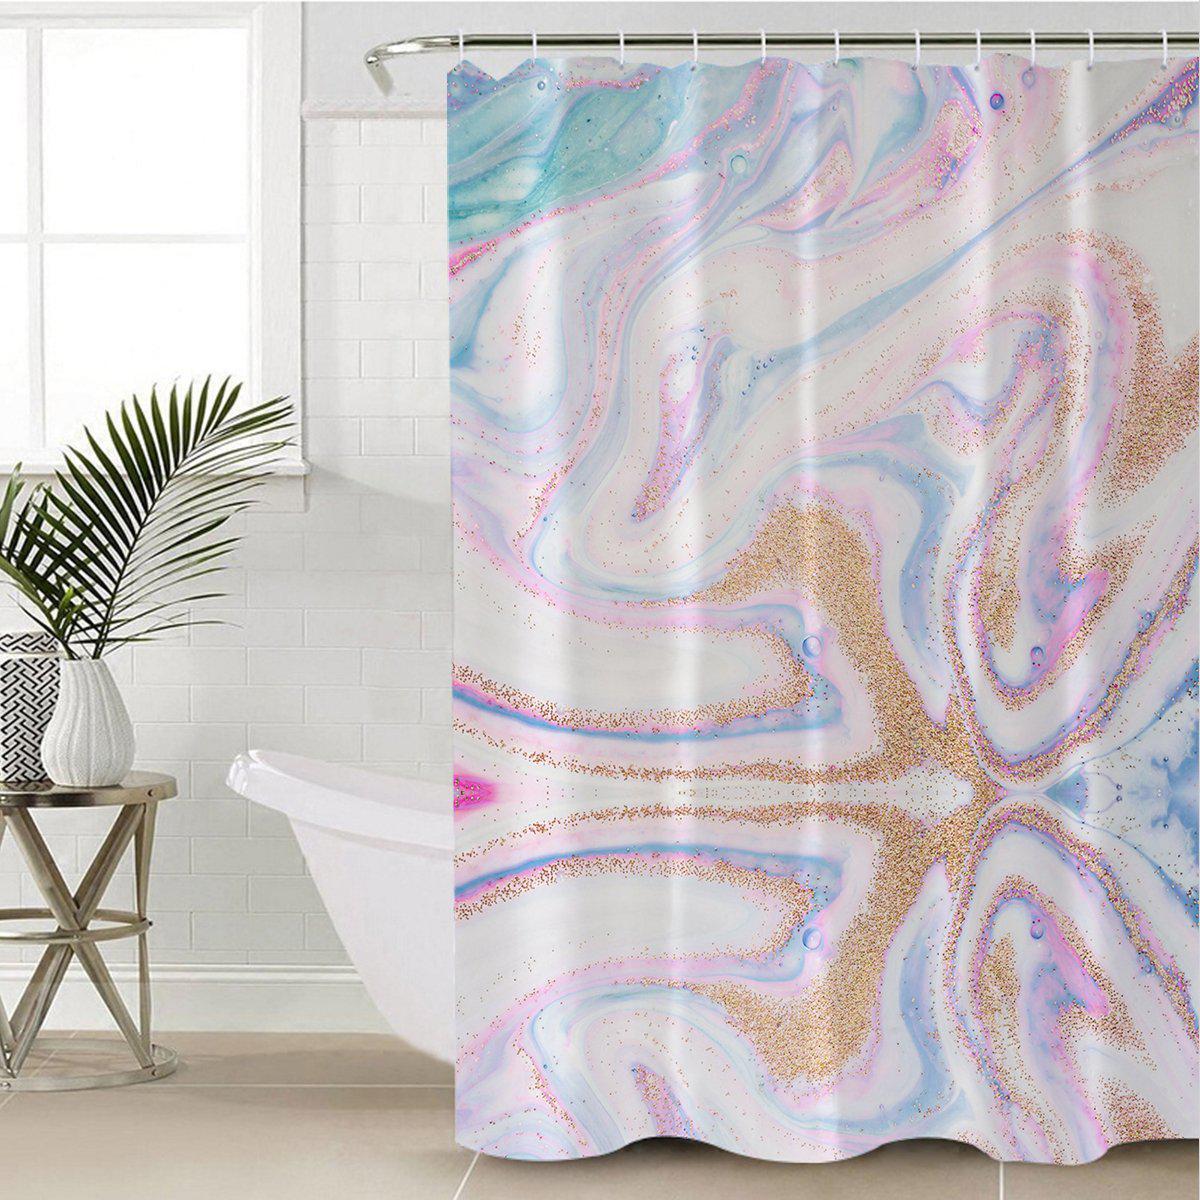 Shower Curtain - Tropical Palm Leaves by Coastal Passion